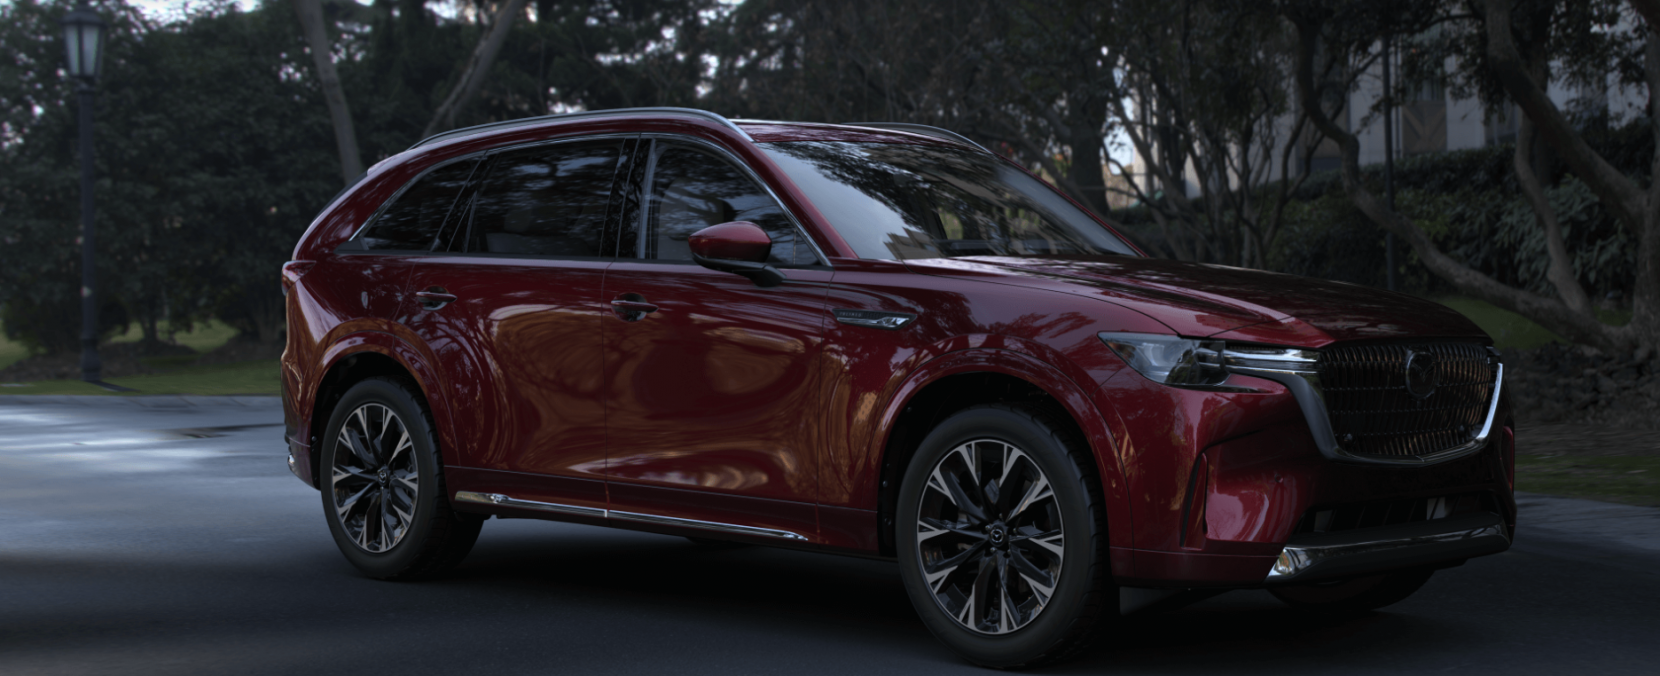 The 2024 Mazda CX-90 - What’s New?